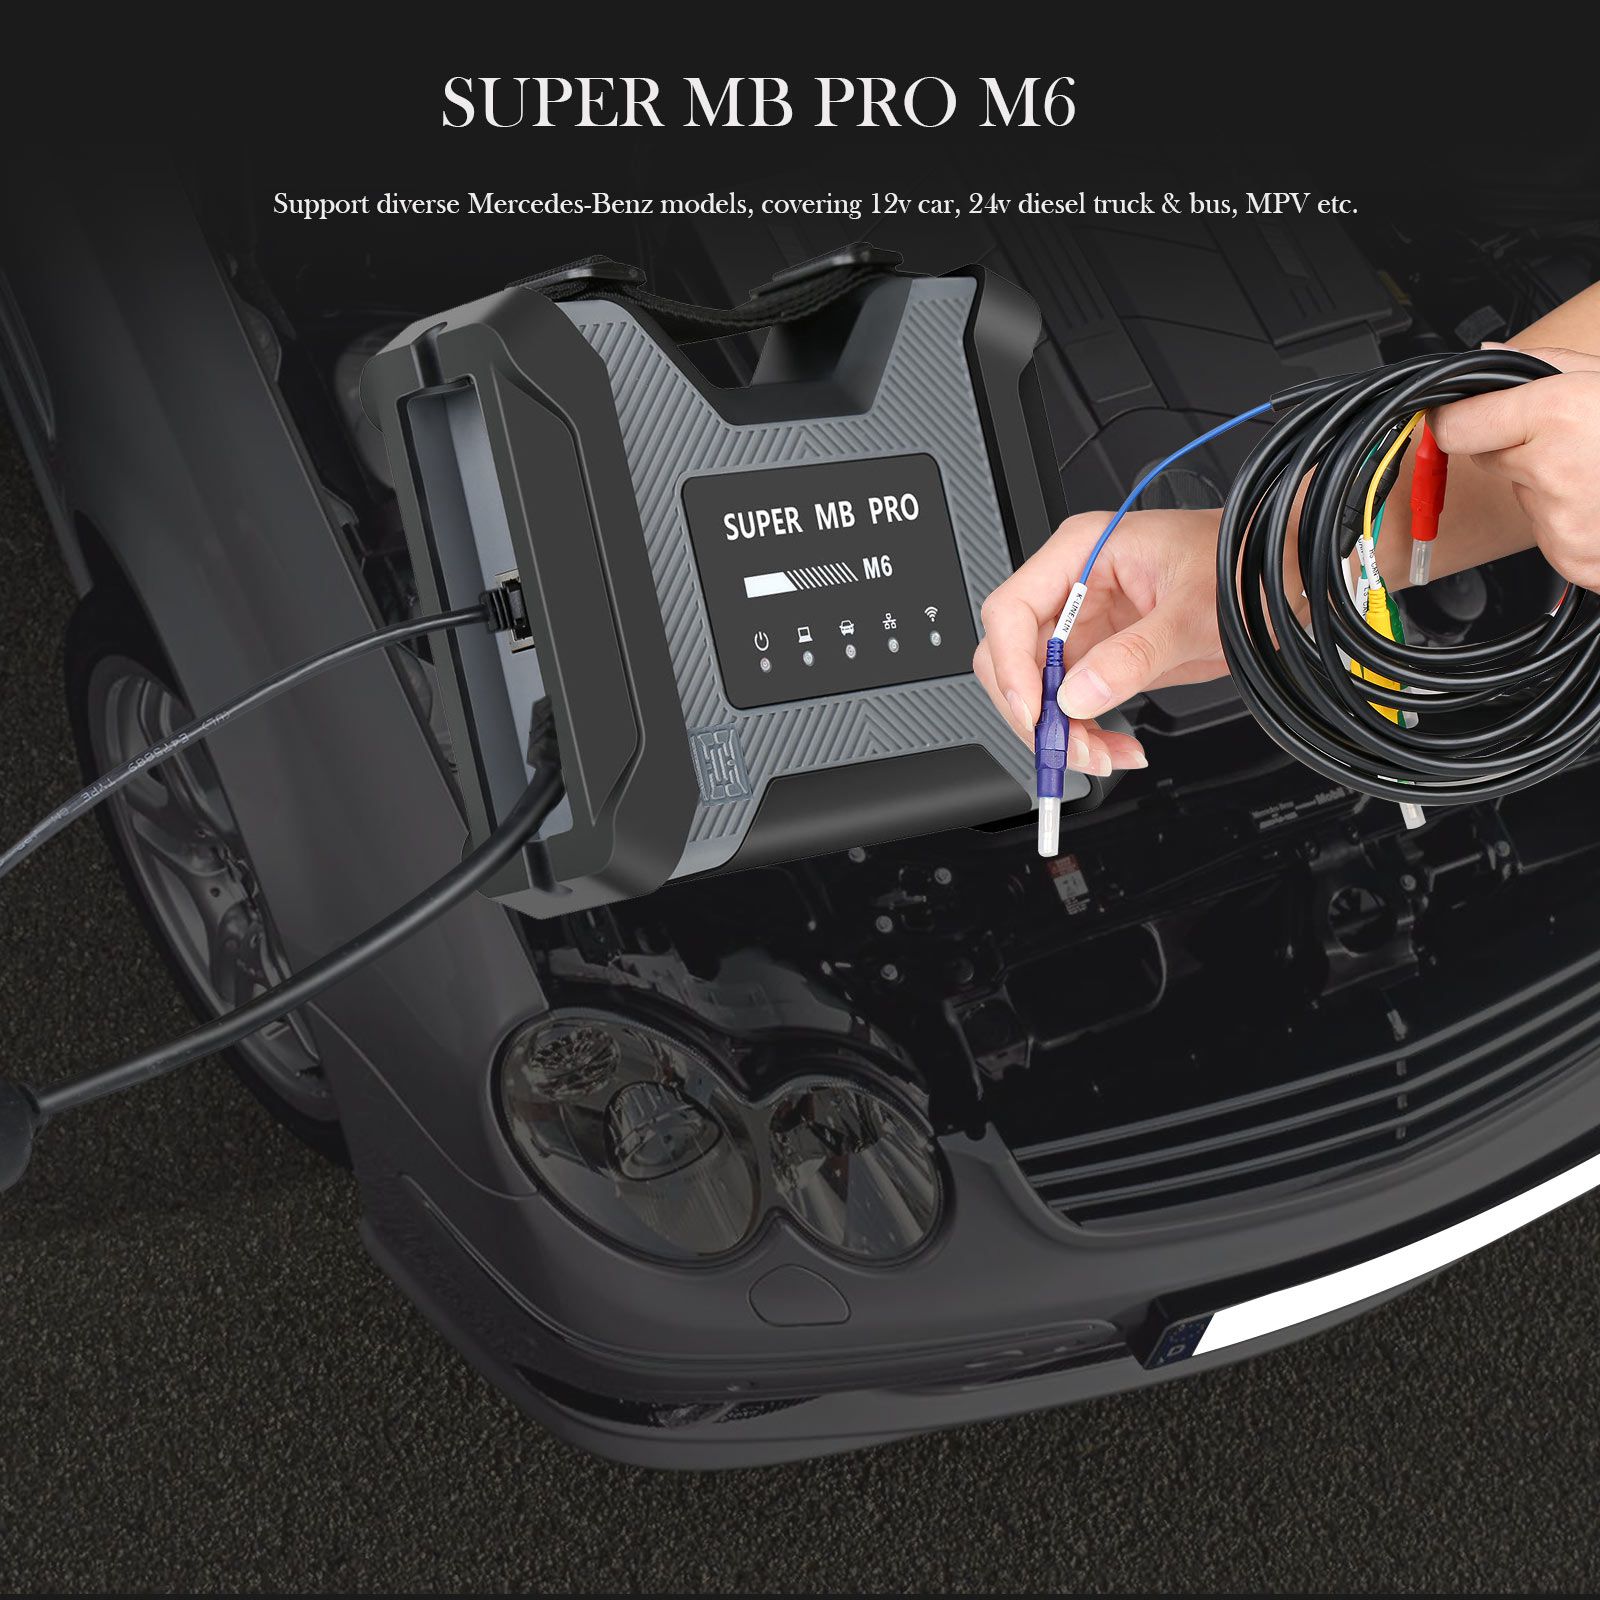 Super MB Pro M6 for BENZ Trucks Diagnoses Wireless Diagnosis Tool + OBD2 16Pin Cable + Lan Cable + 14Pin Cable